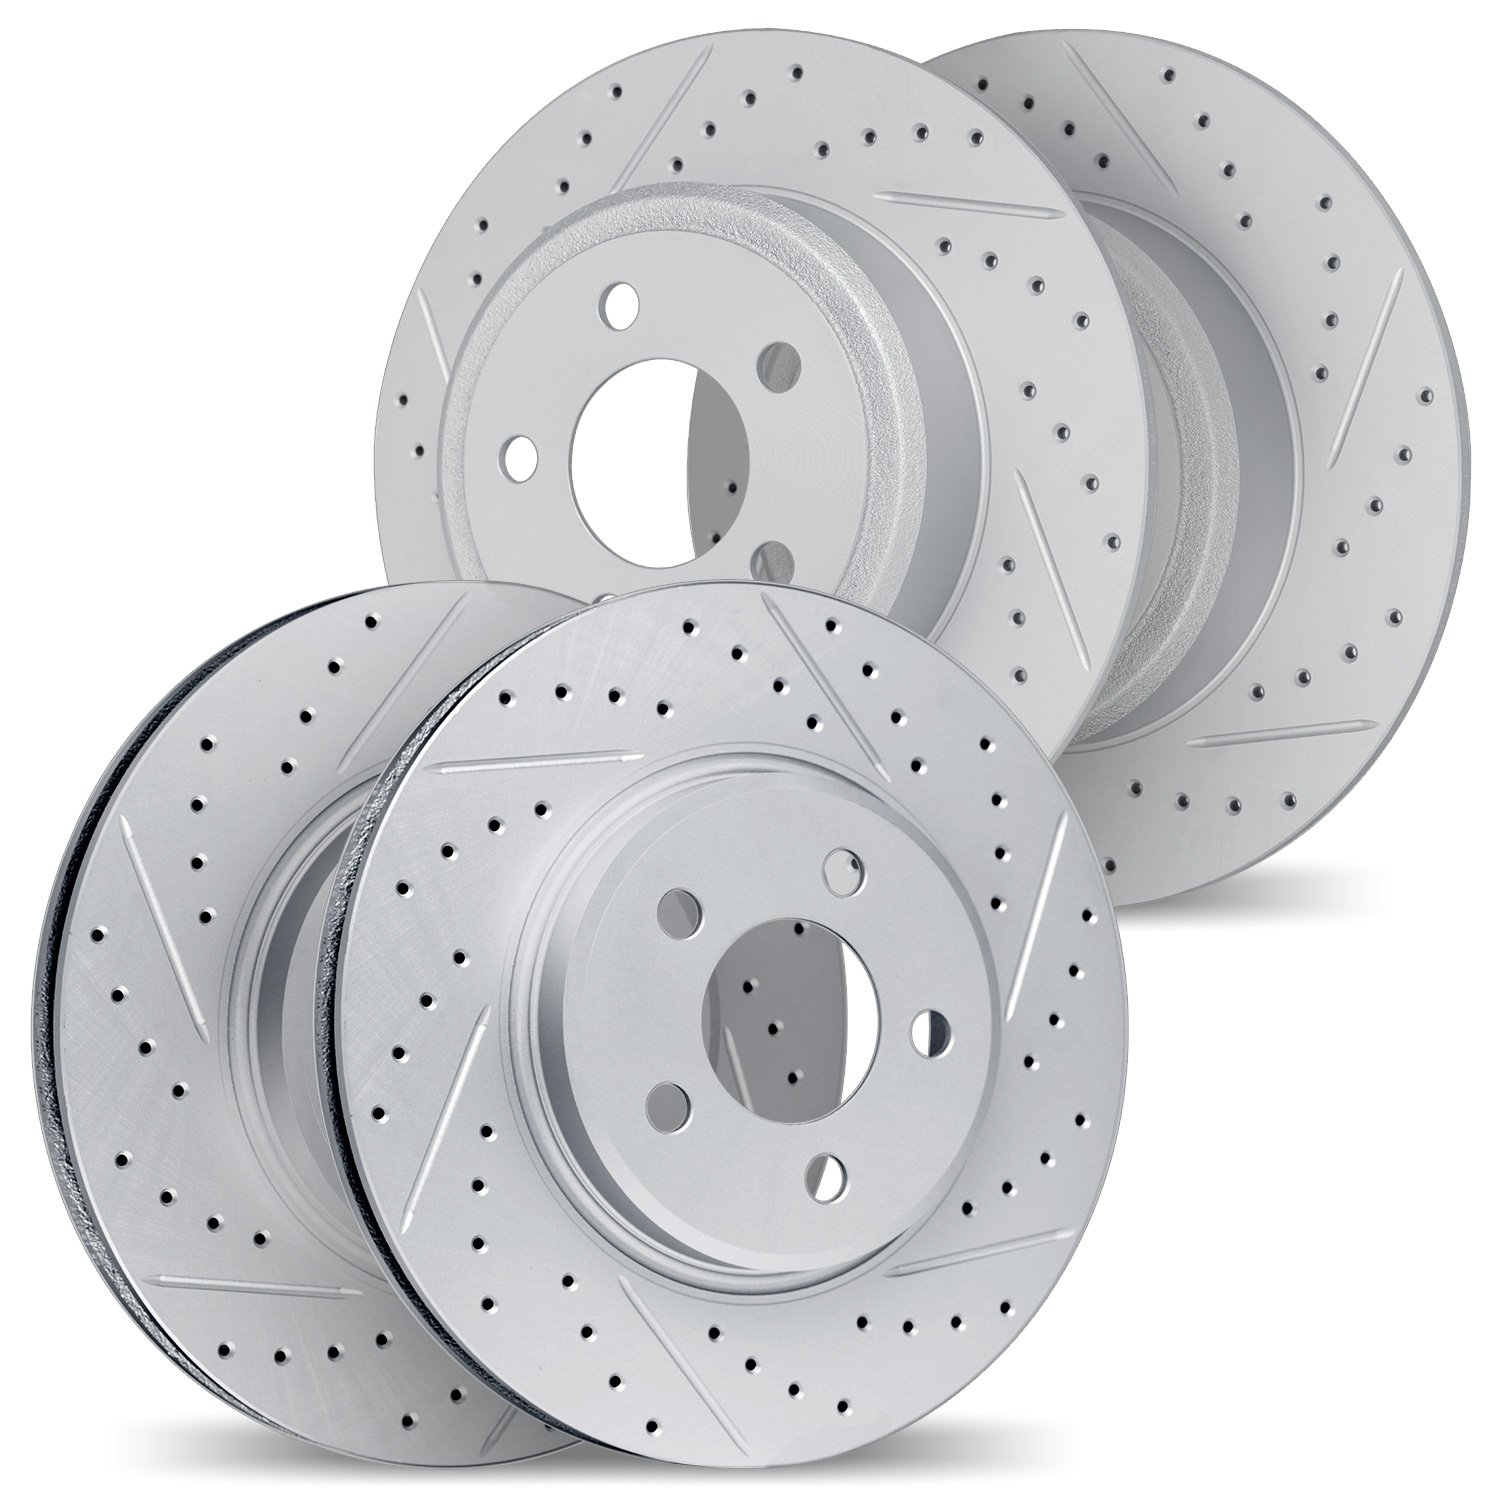 2004-80013 Geoperformance Drilled/Slotted Brake Rotors, Fits Select Ford/Lincoln/Mercury/Mazda, Position: Front and Rear